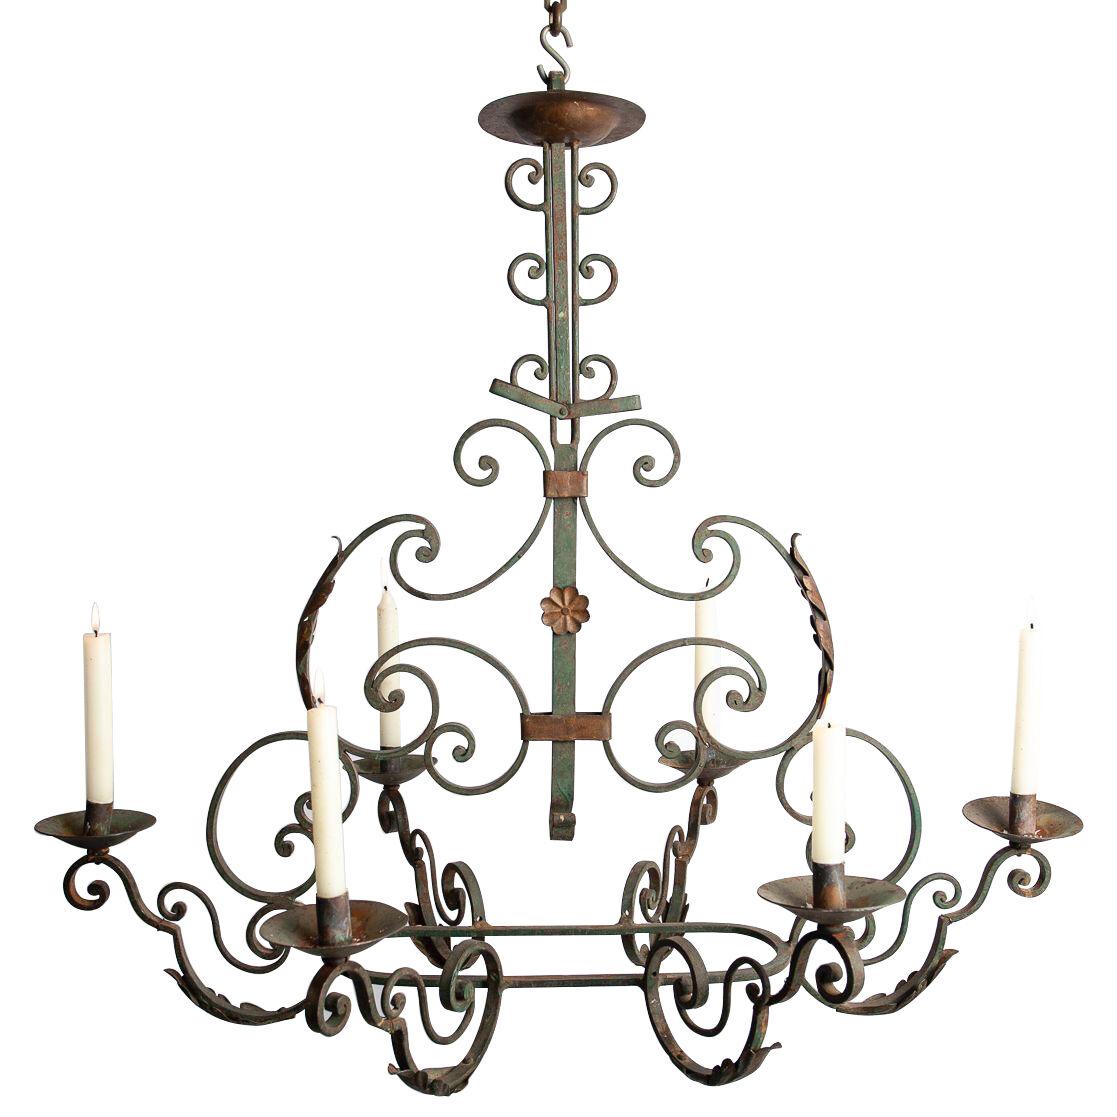 An Early 20th Century French Wrought Iron Six armed Chandelier